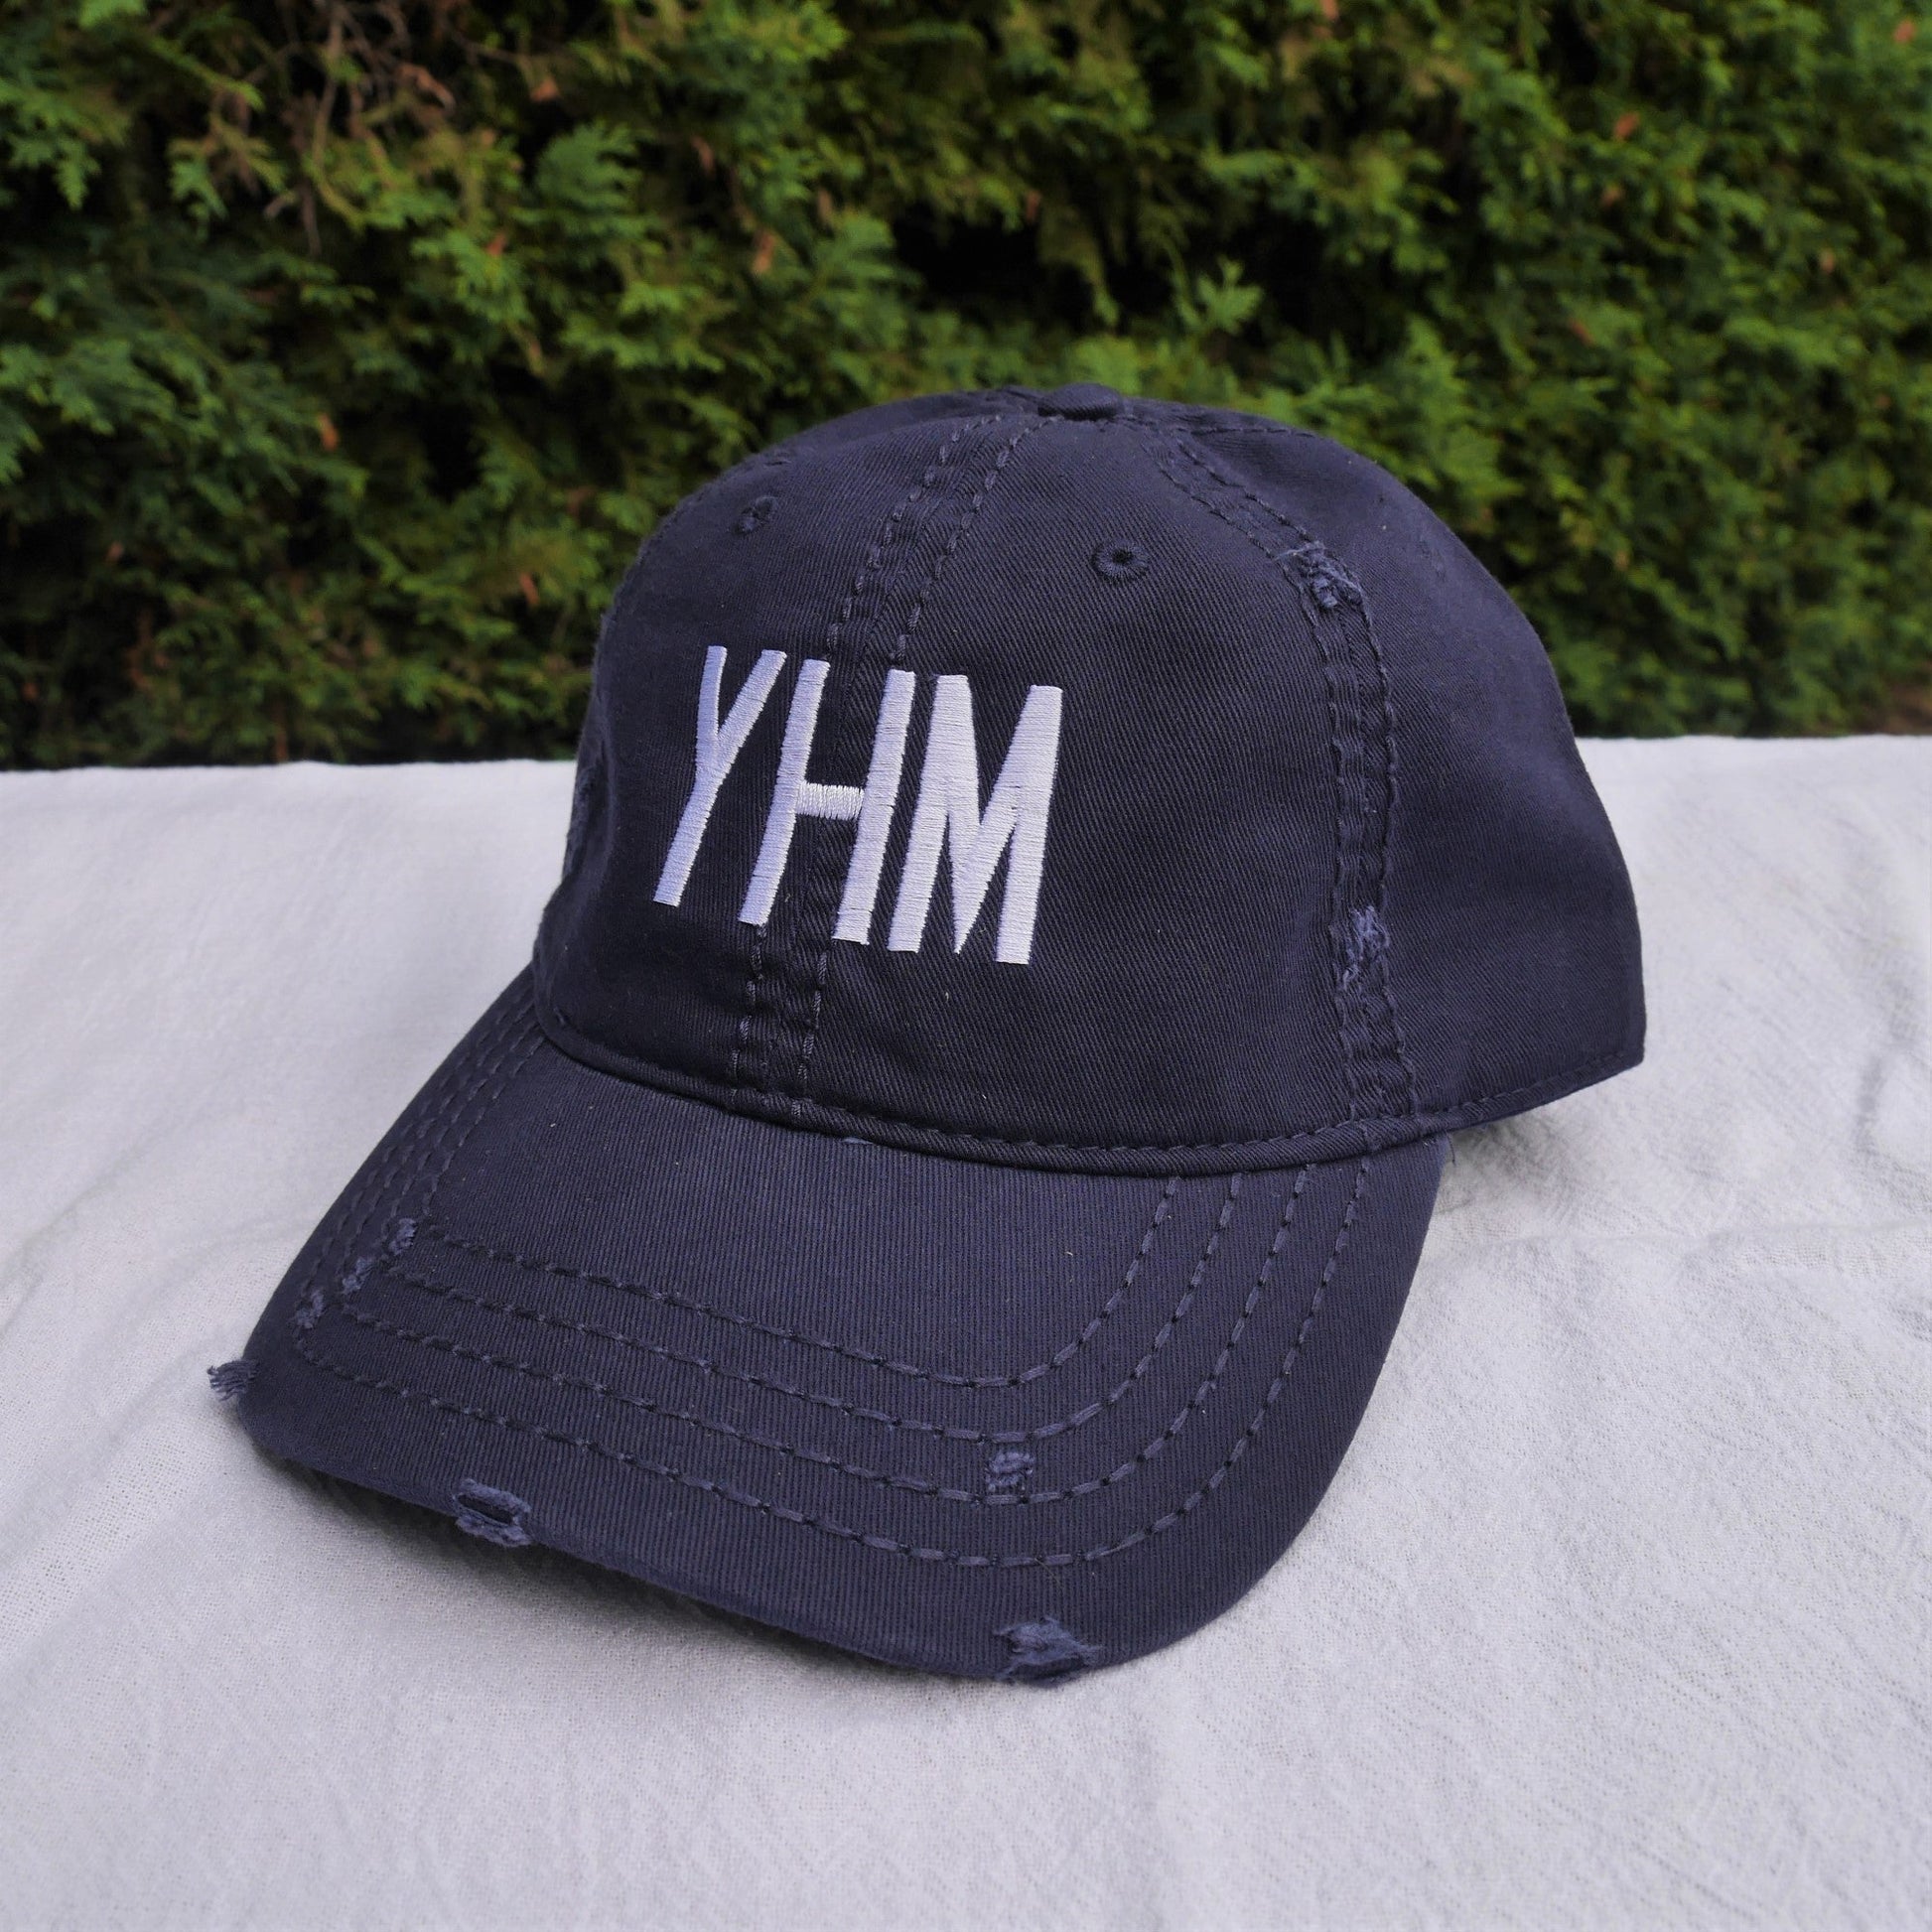 Airport Code Distressed Hat - White • MKE Milwaukee • YHM Designs - Image 21